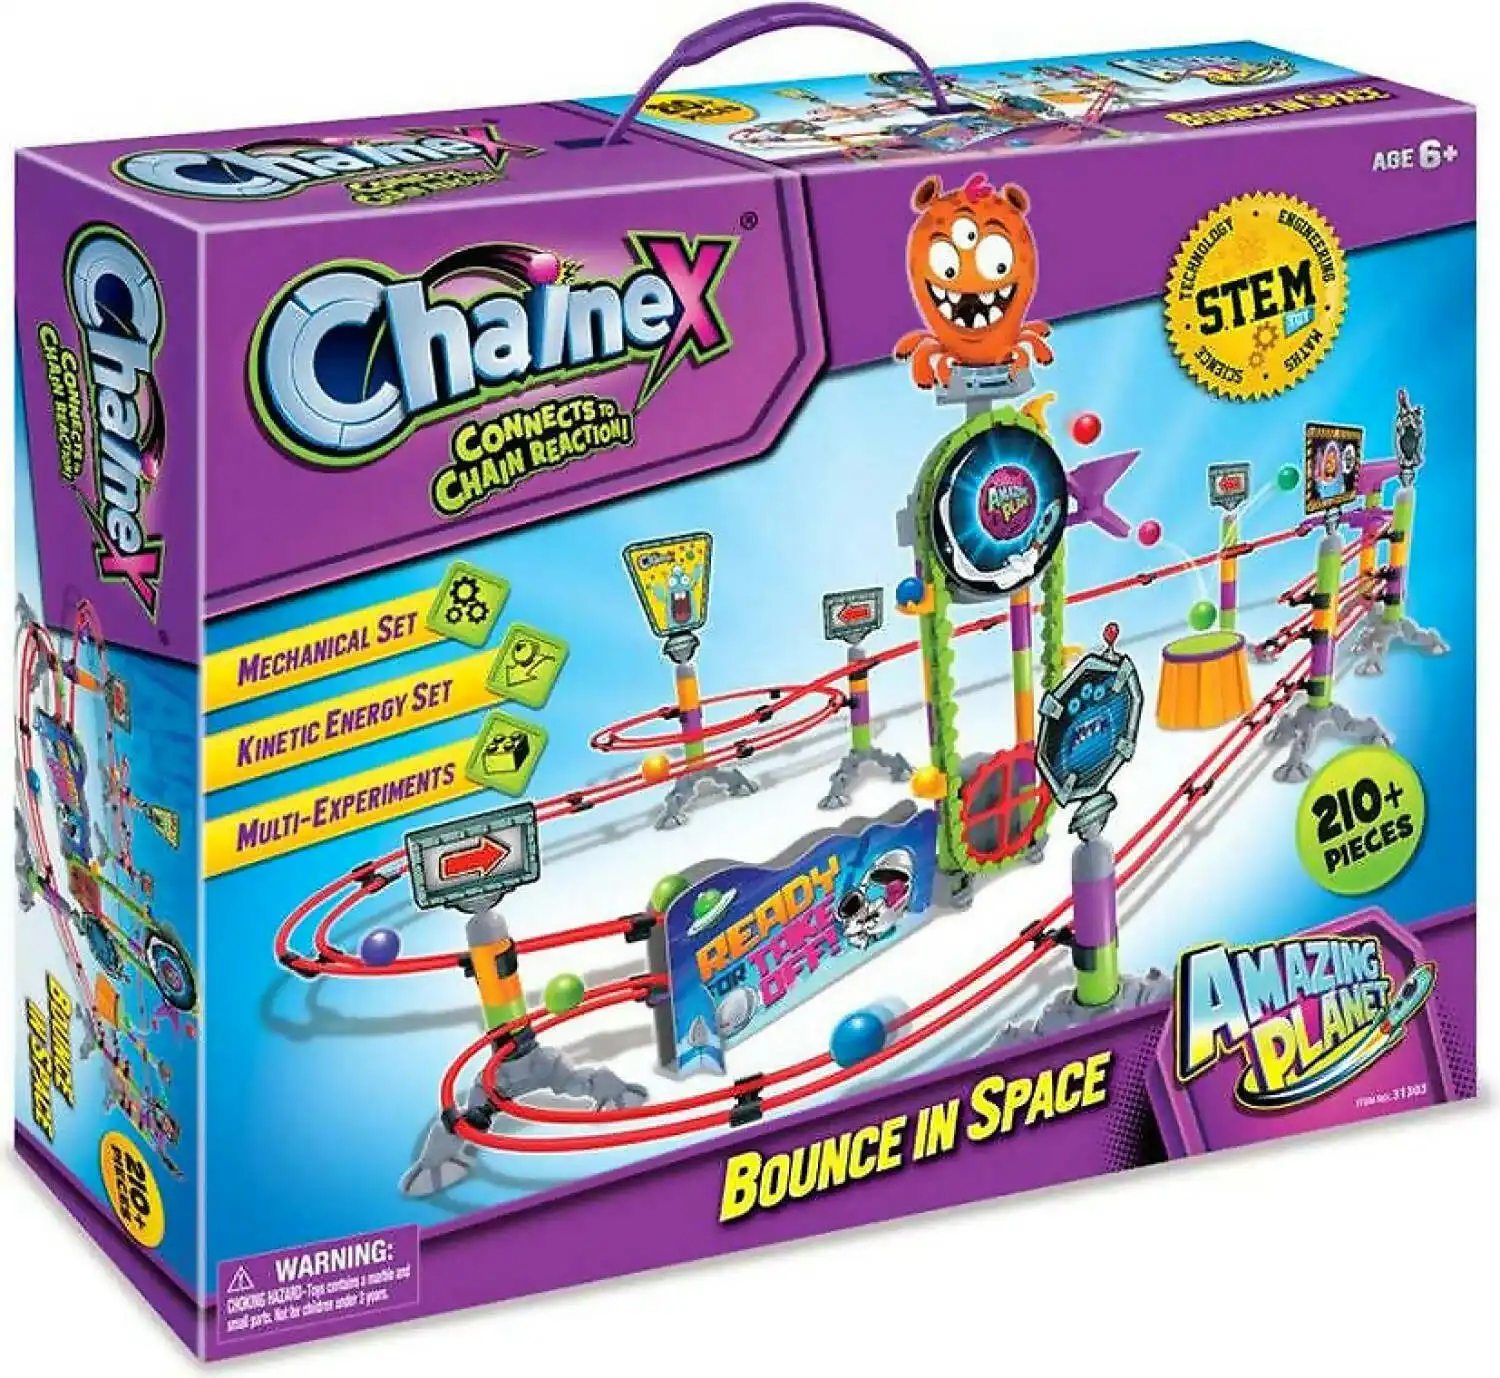 Chainex - Bounce In Space 210+ Pieces